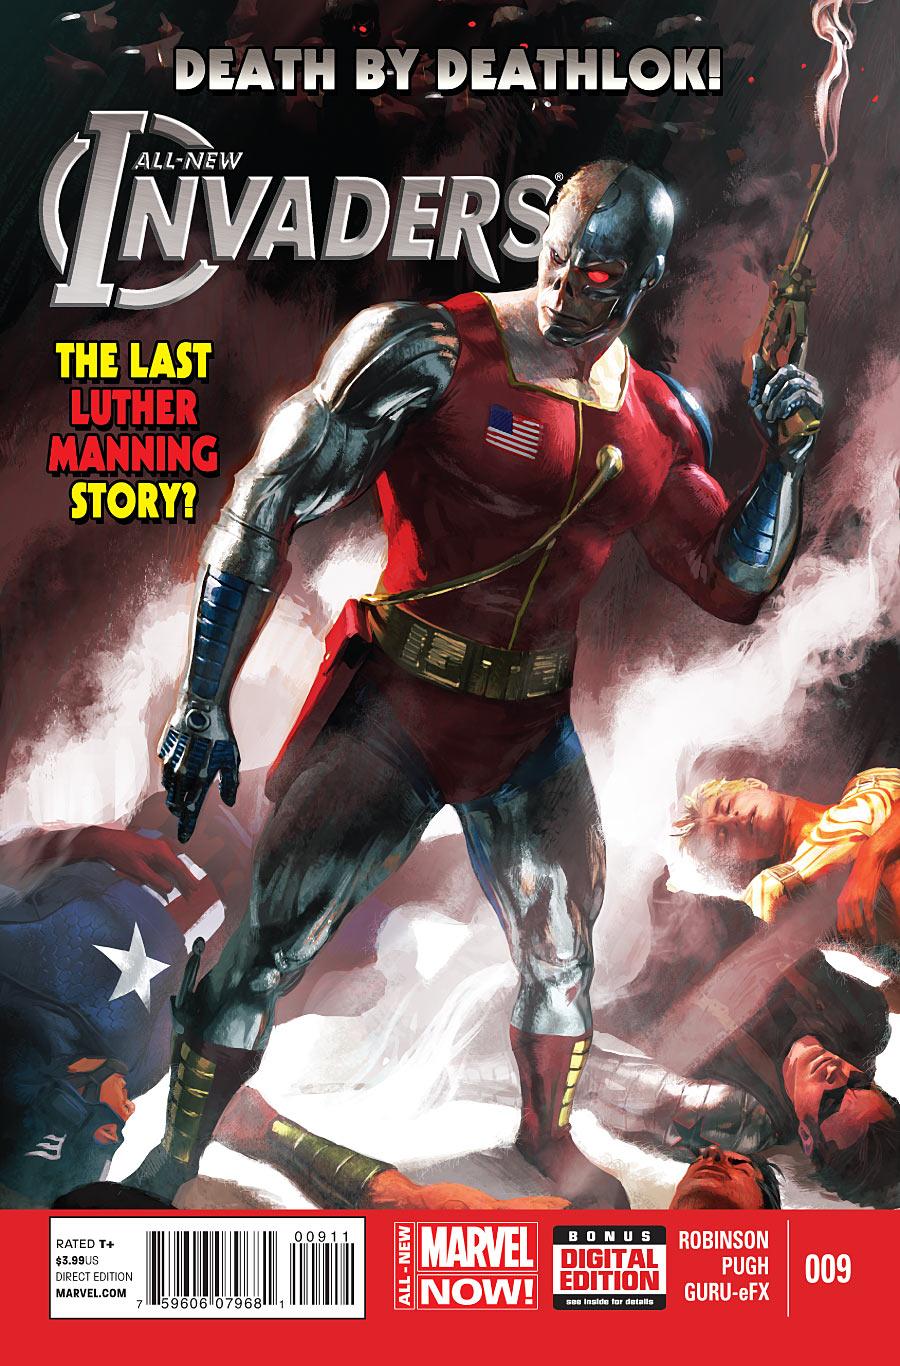 All-New Invaders Vol. 1 #9